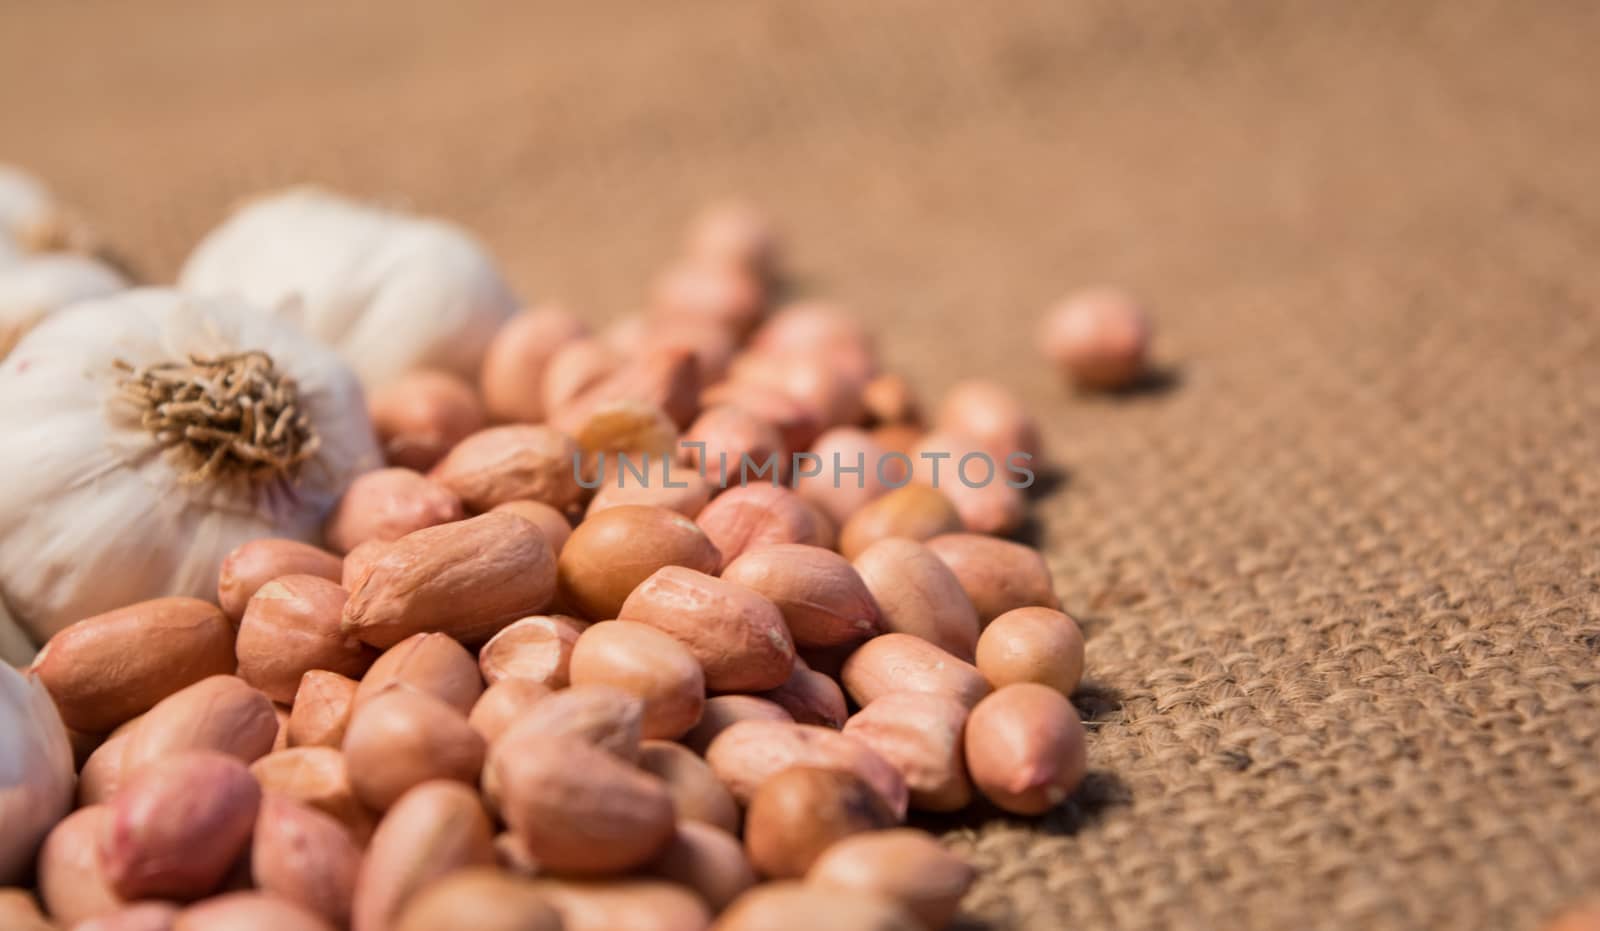 Group of Garlic and groun nuts on sackcloth for food.